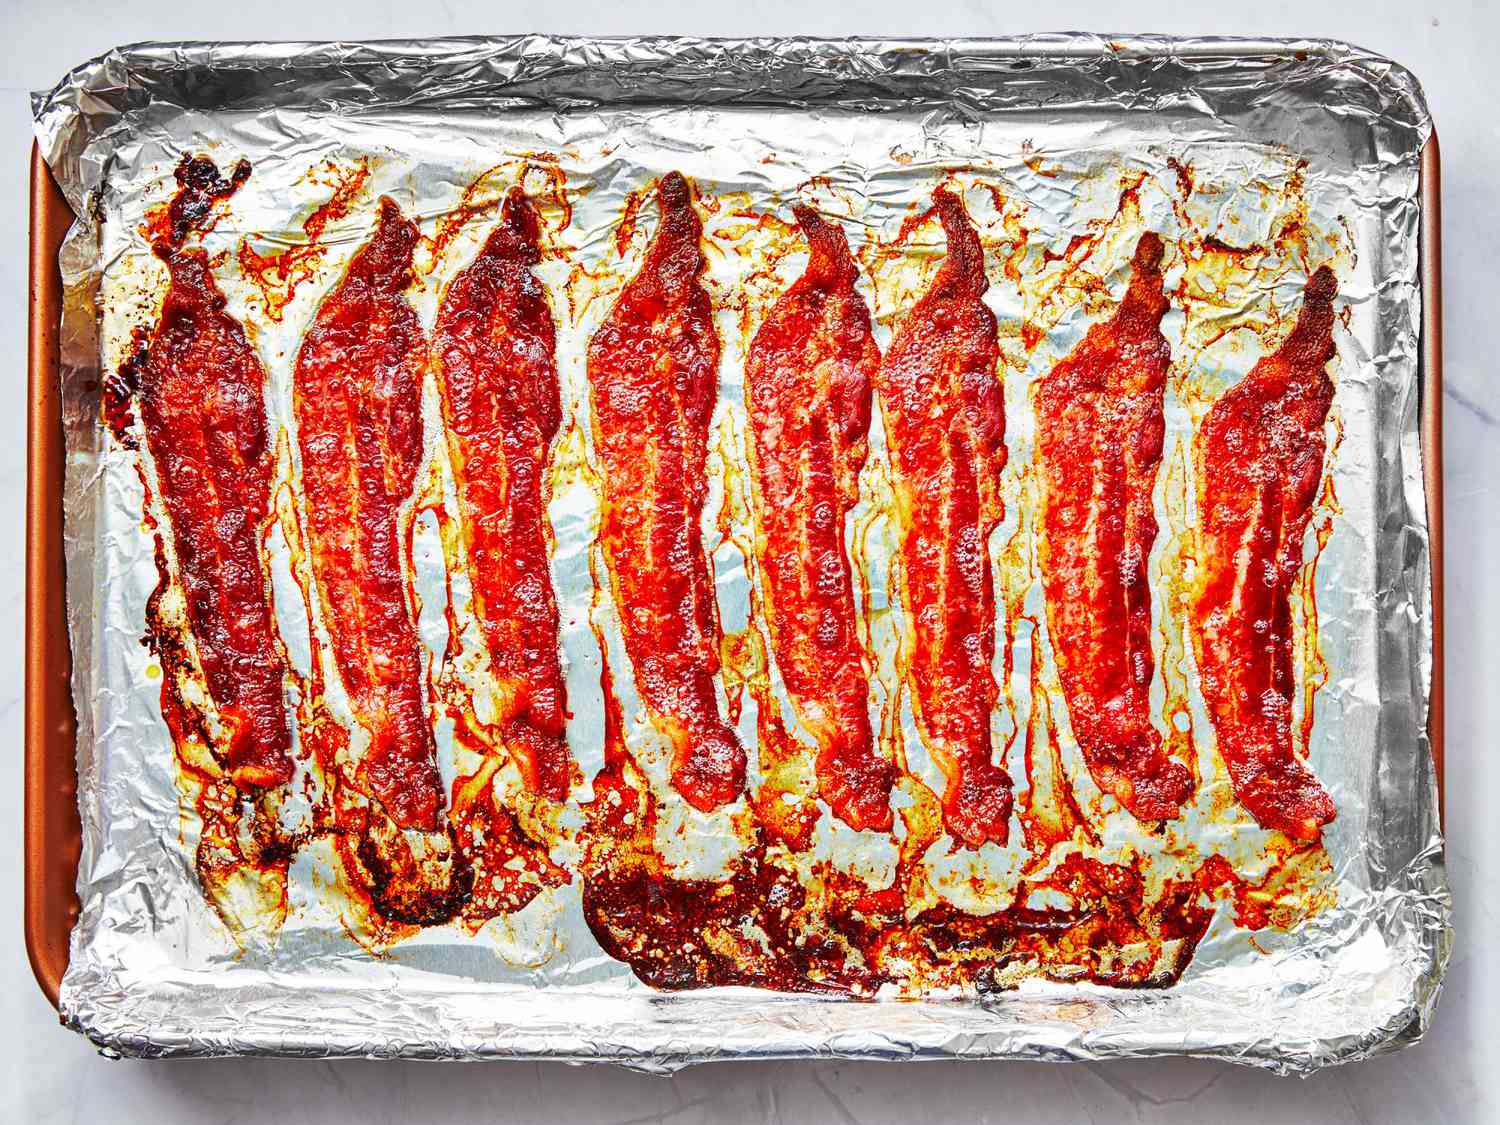 Tips for Perfect Oven-Cooked Bacon